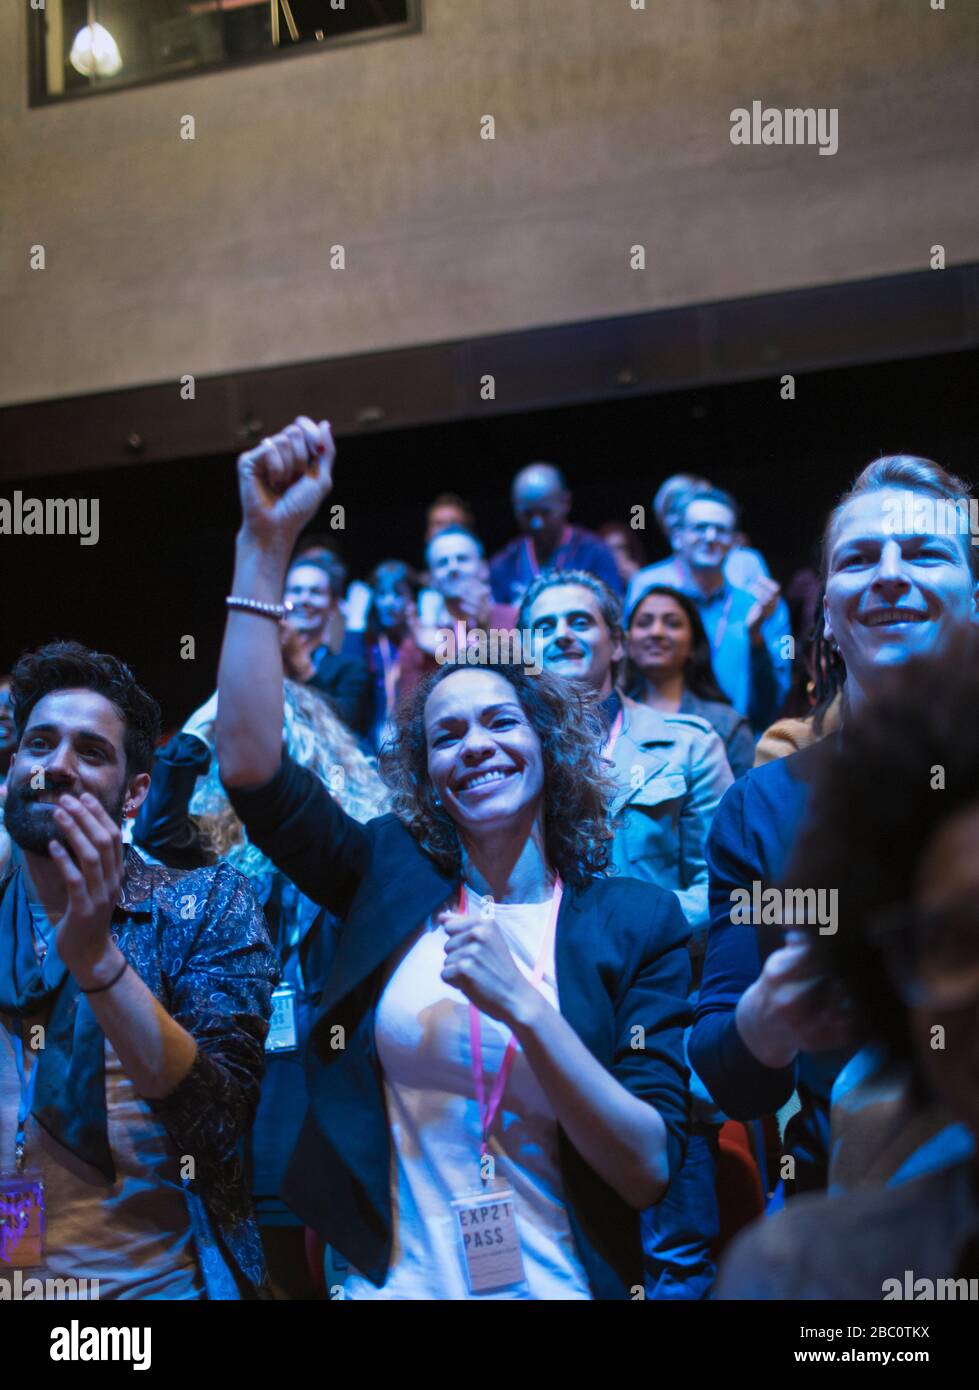 Enthusiastic audience cheering Stock Photo